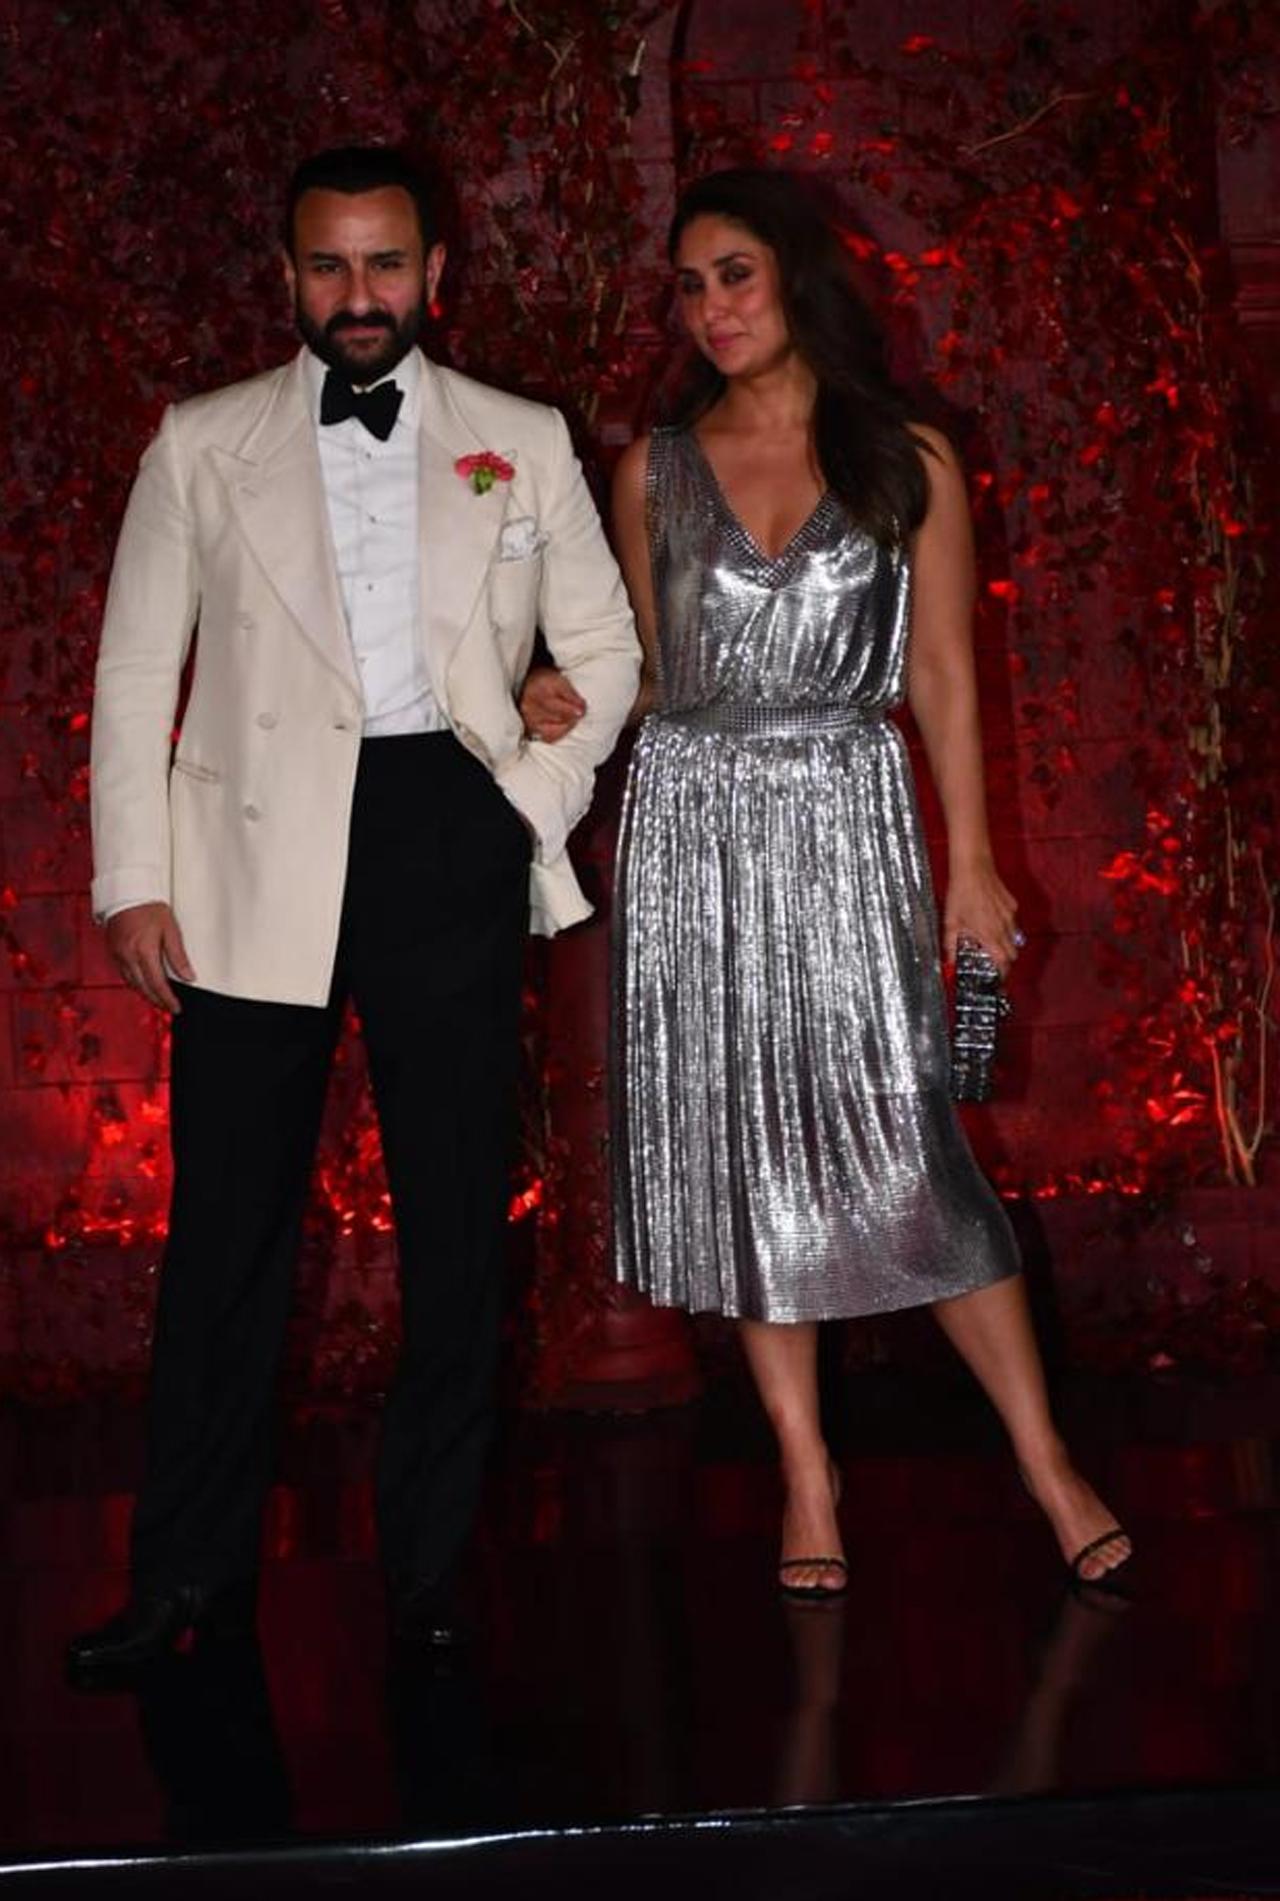 Saif and Kareena always manage to grab eyeballs with their stylish outfits and poses and this one is no exception. The duo has acted in films like LOC Kargil, Omkara, Tashan, Kurbaan, and Agent Vinod. 